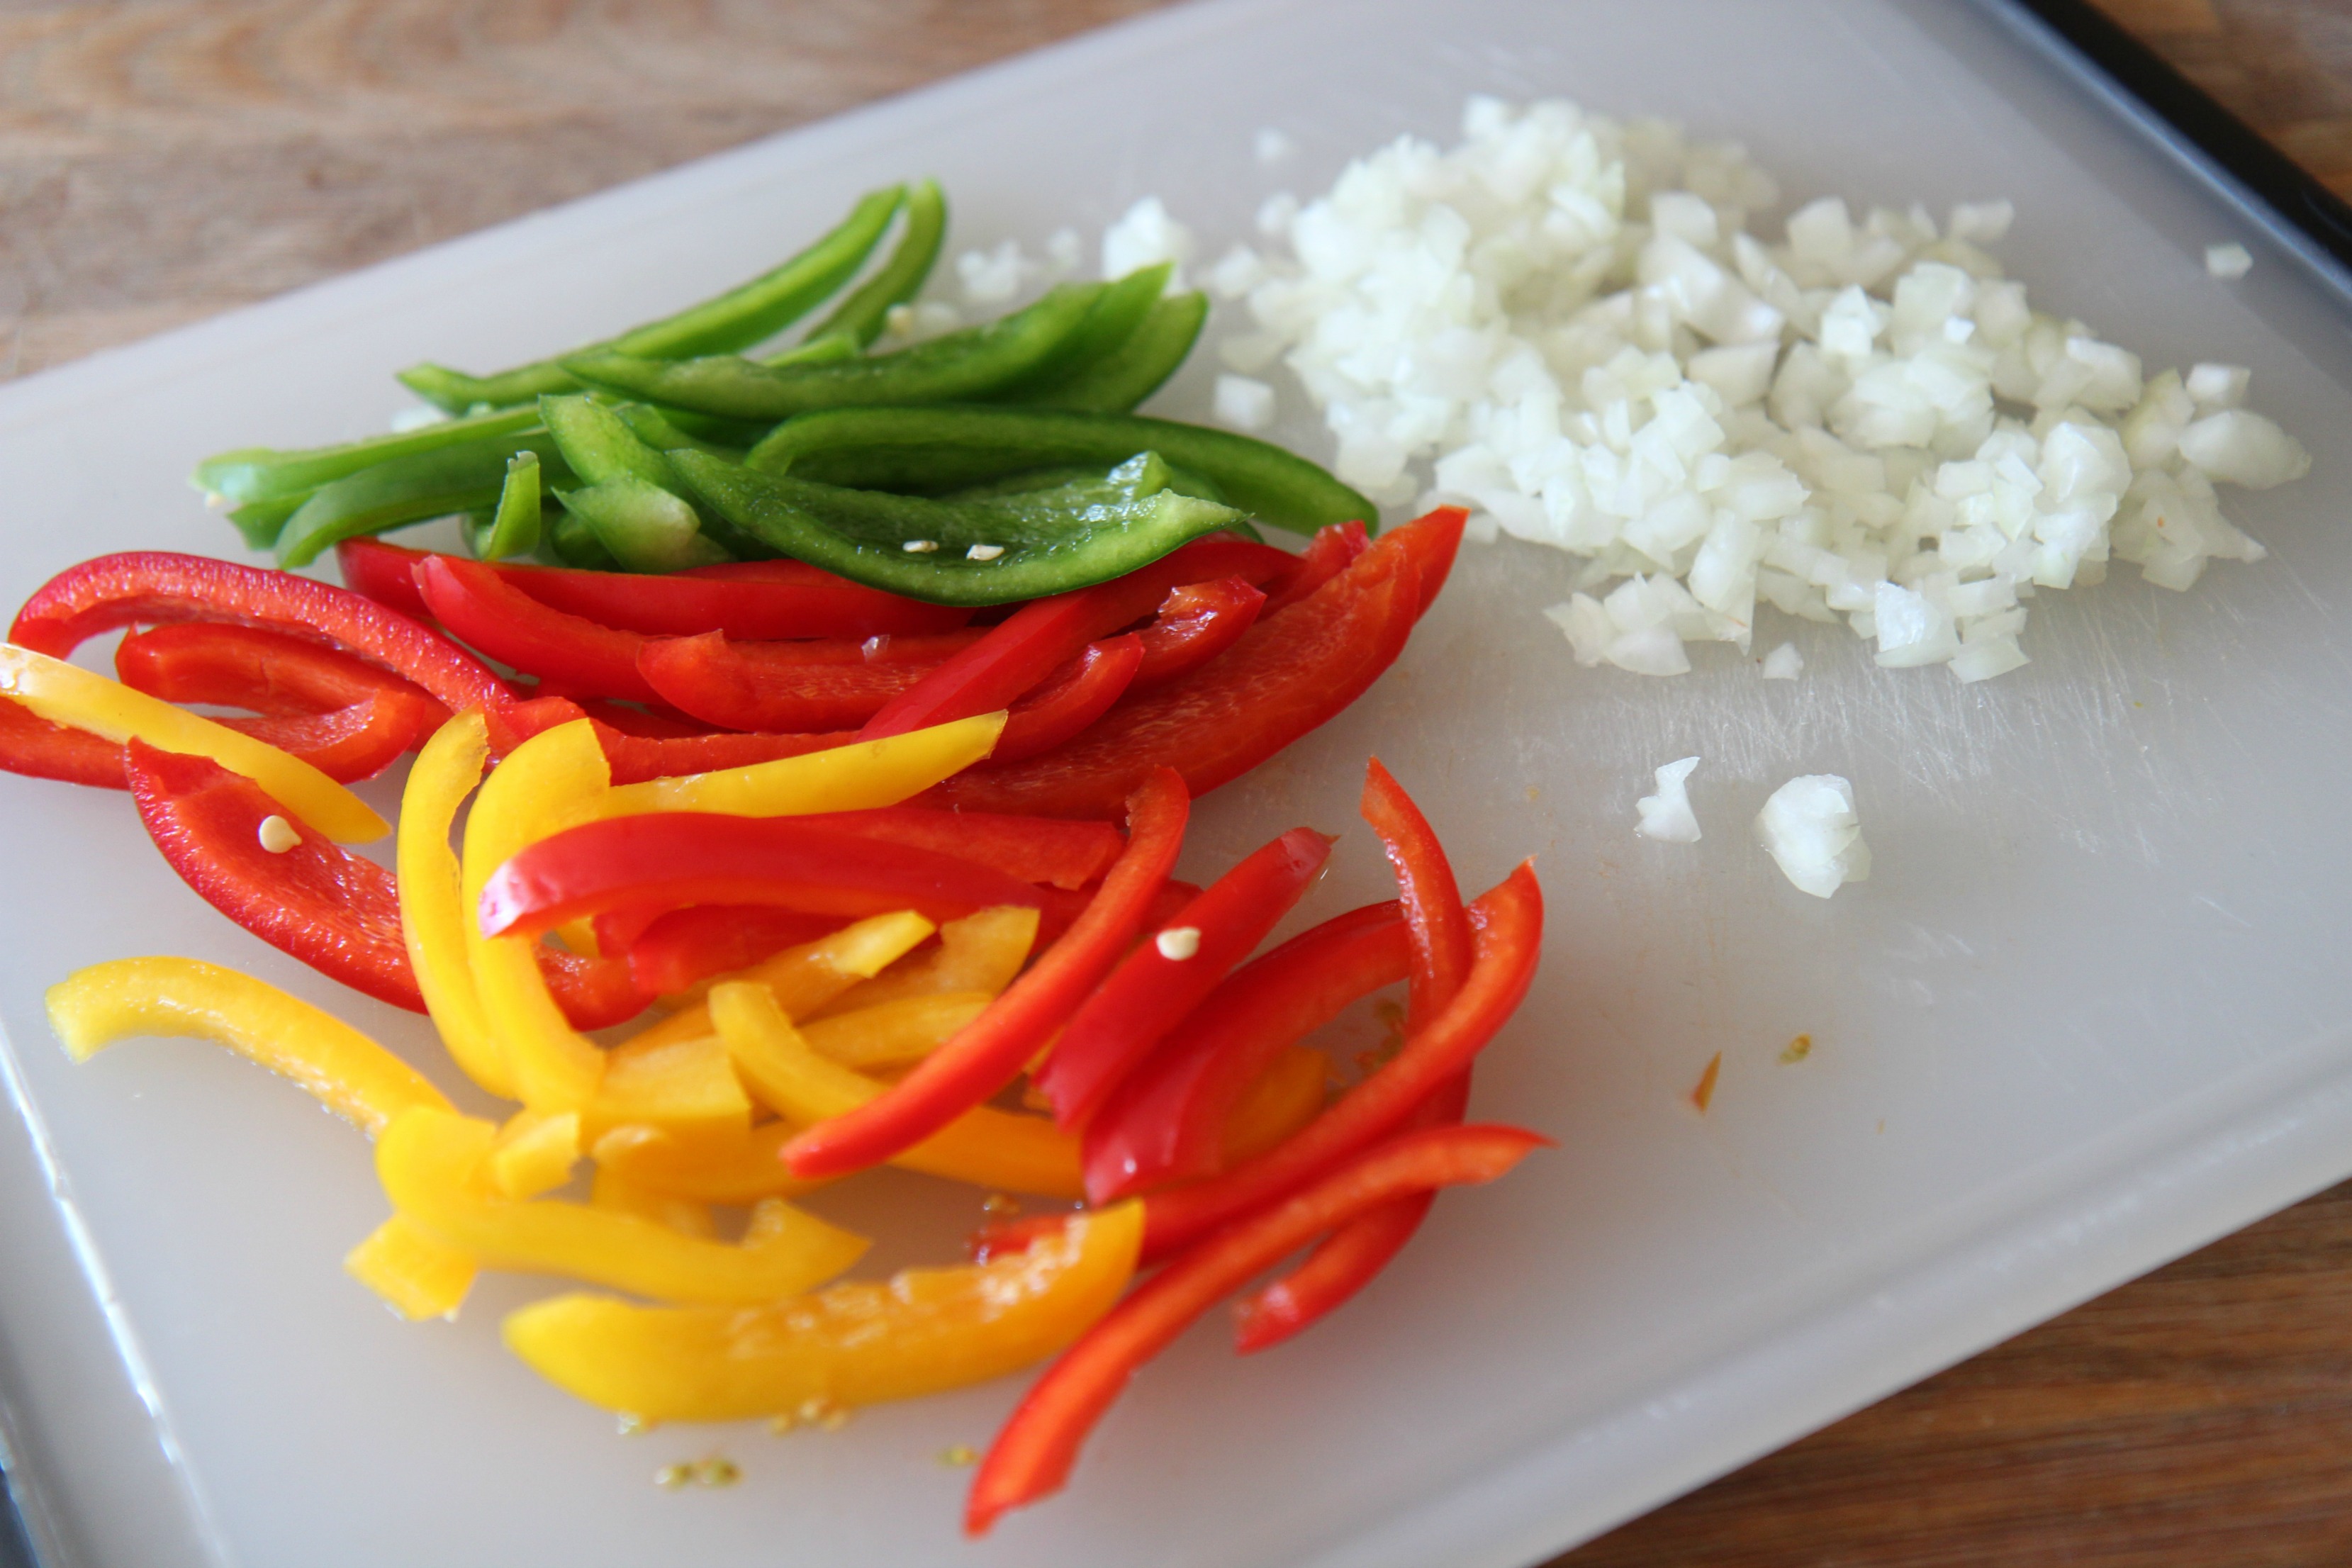 Slice red, yellow, and green bell peppers and dice a small white onion.